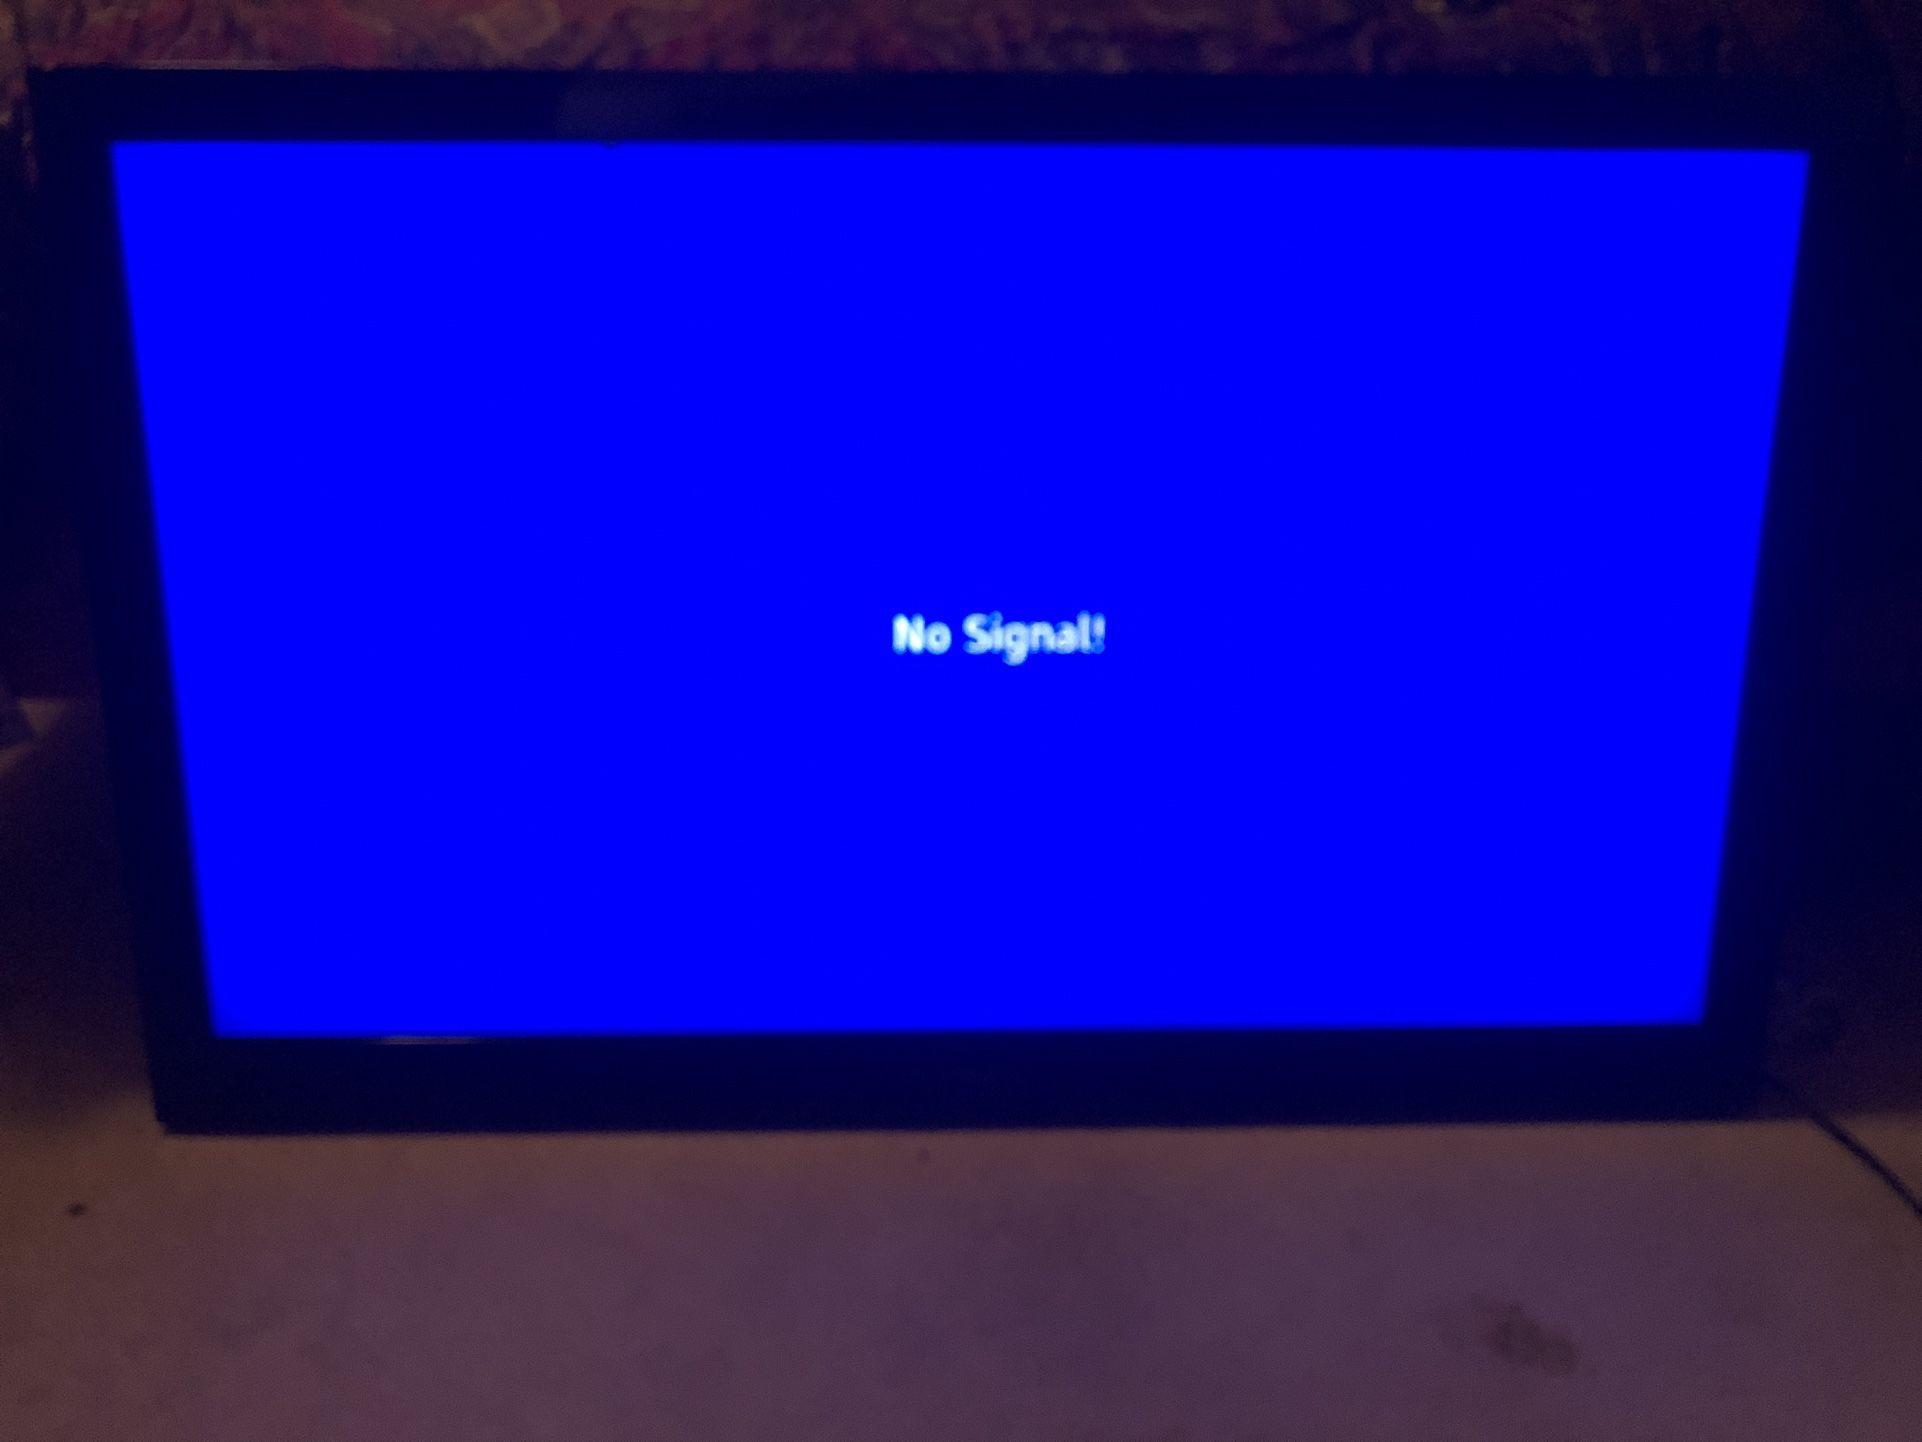 Dynex Tv For Sale 